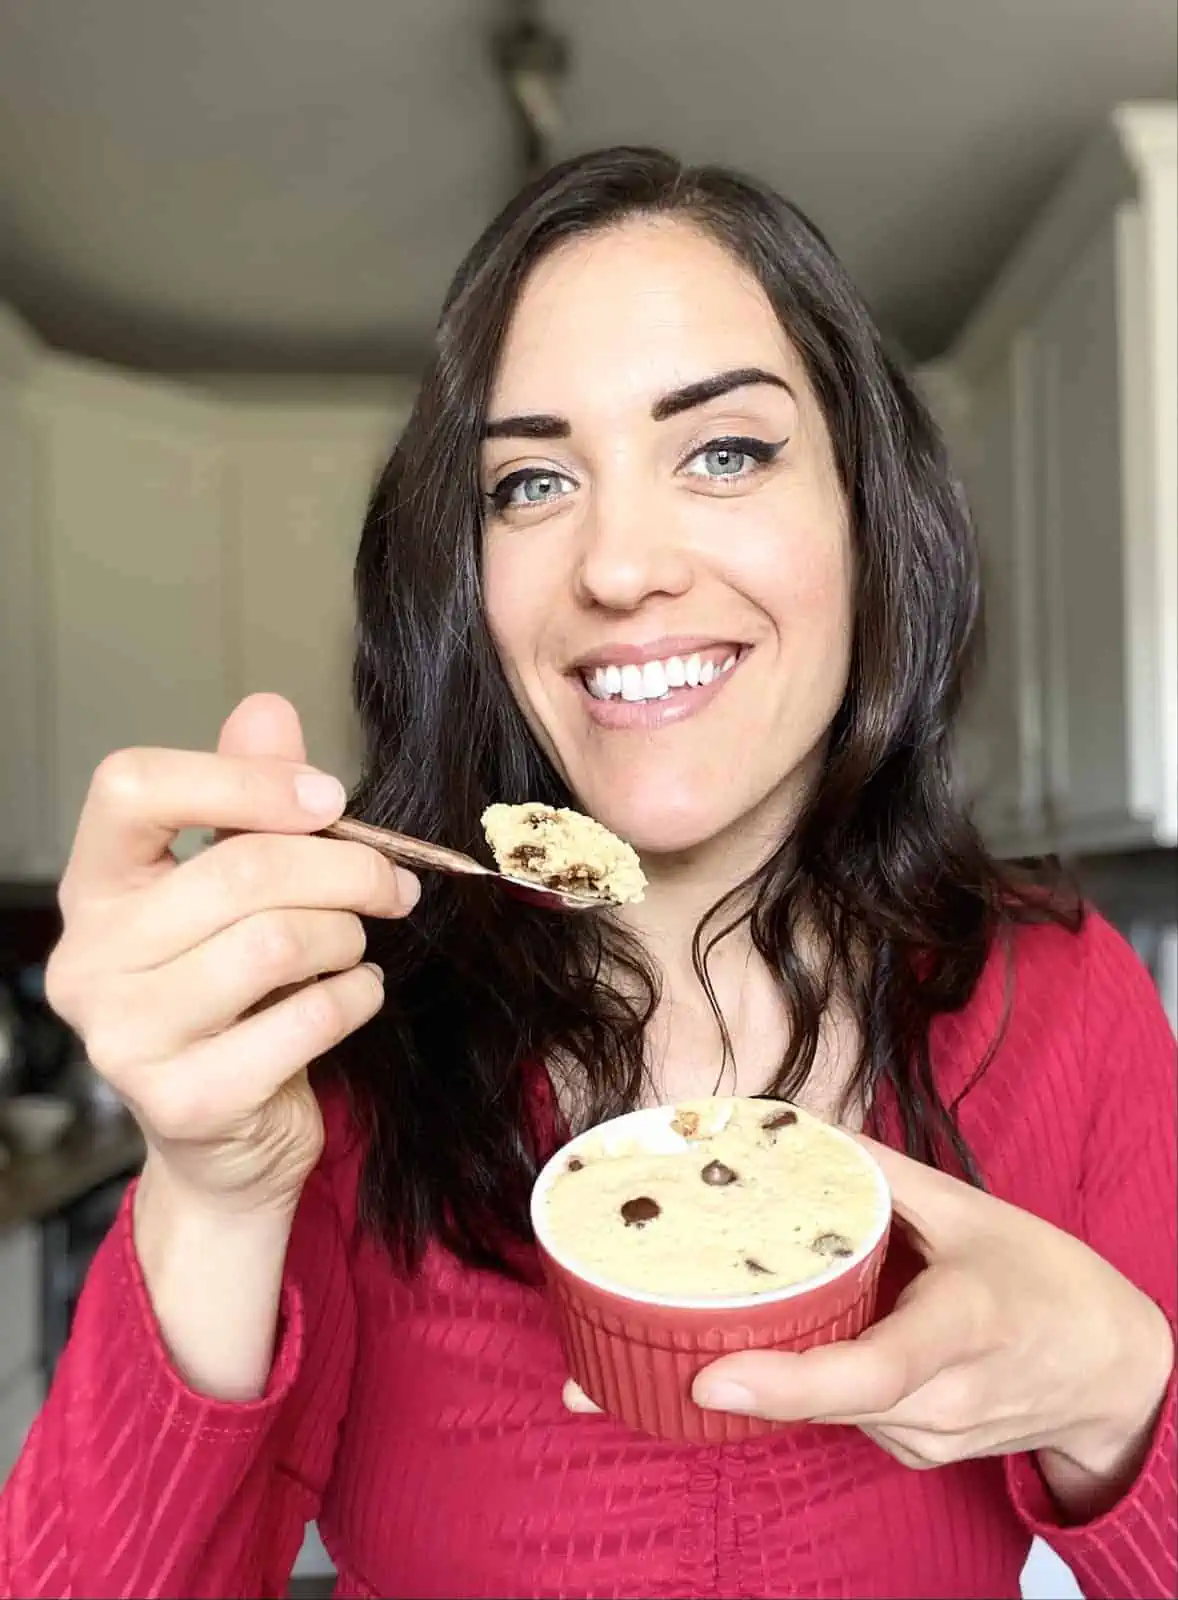 Dark haired woman with red shirt holding mug cake holding up a spoonful of mug cake